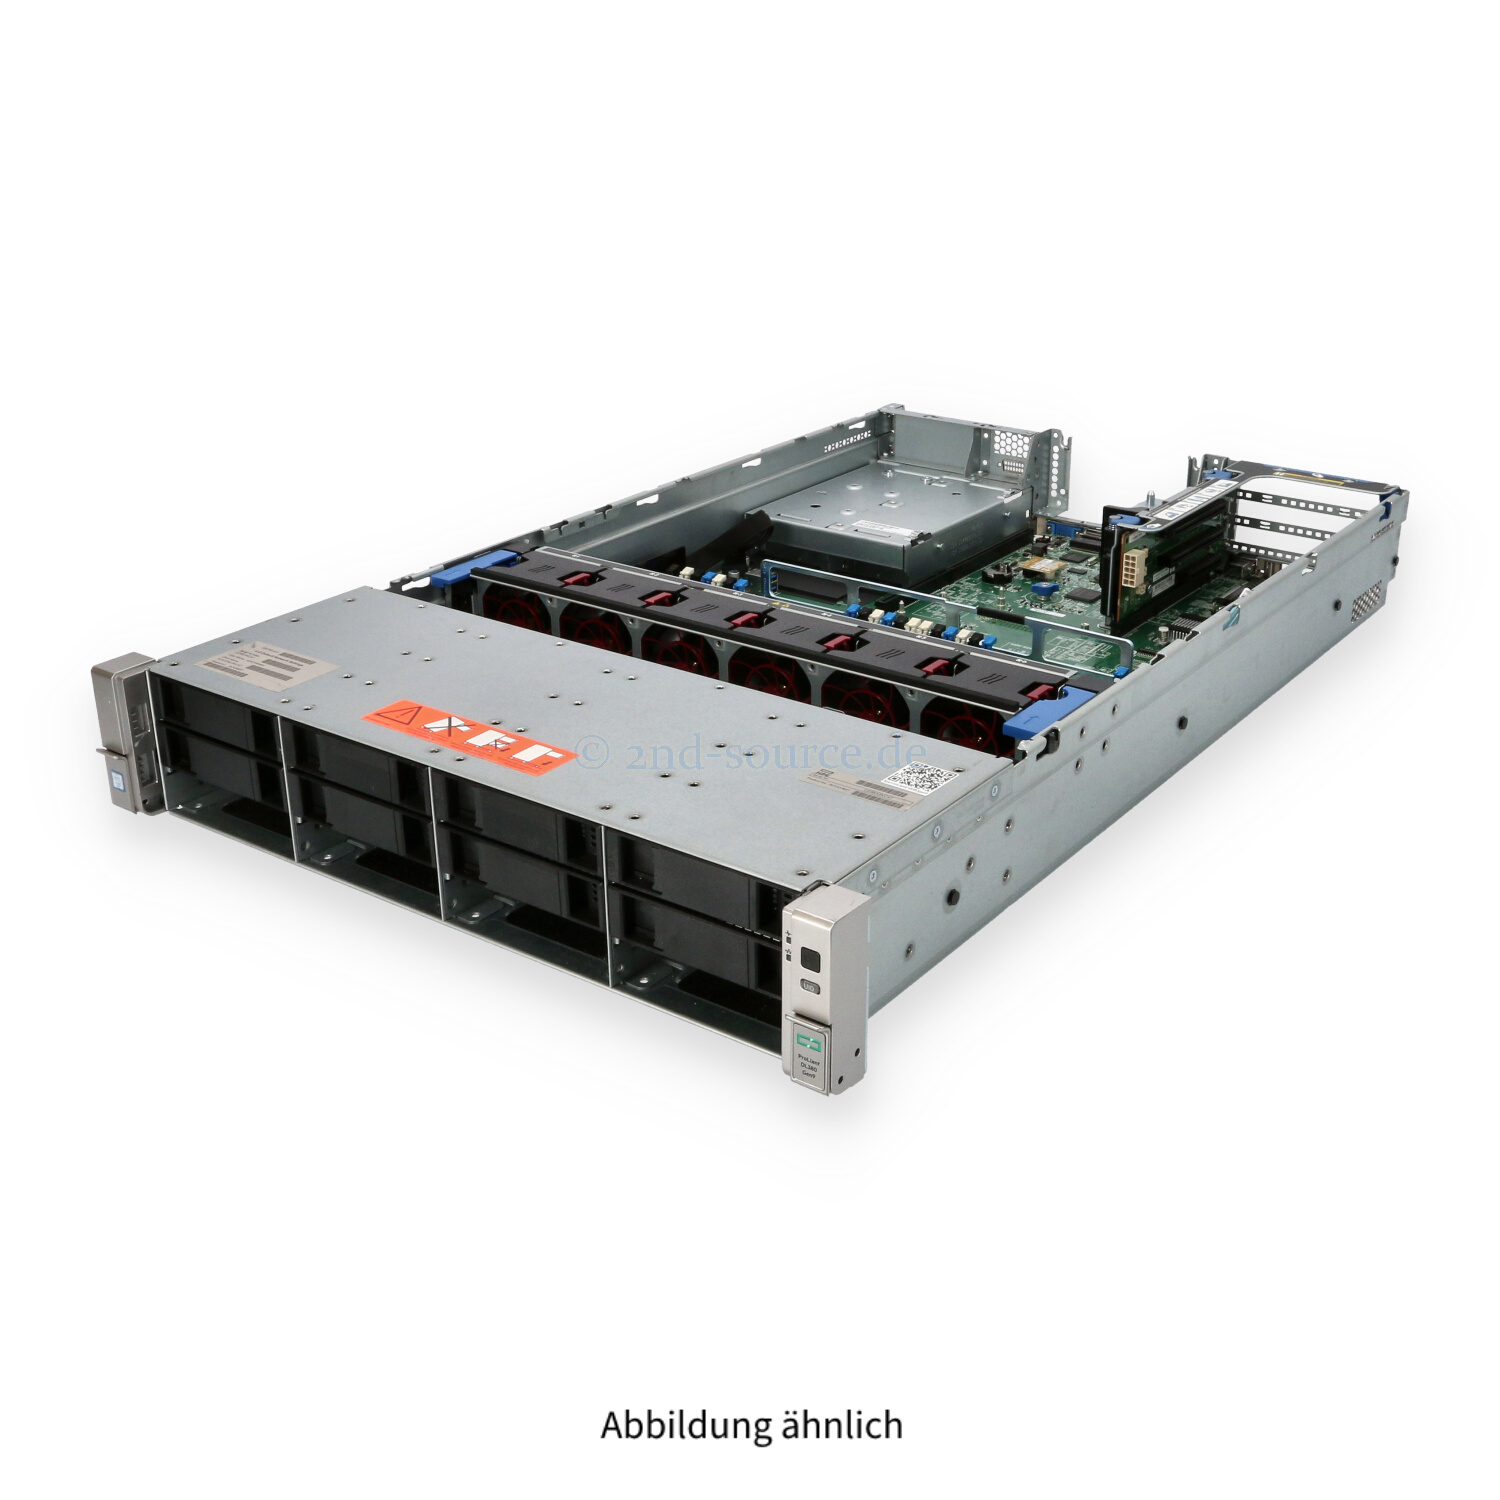 HPE DL380 G9 4xLFF CTO Chassis 767033-B21 843307-001